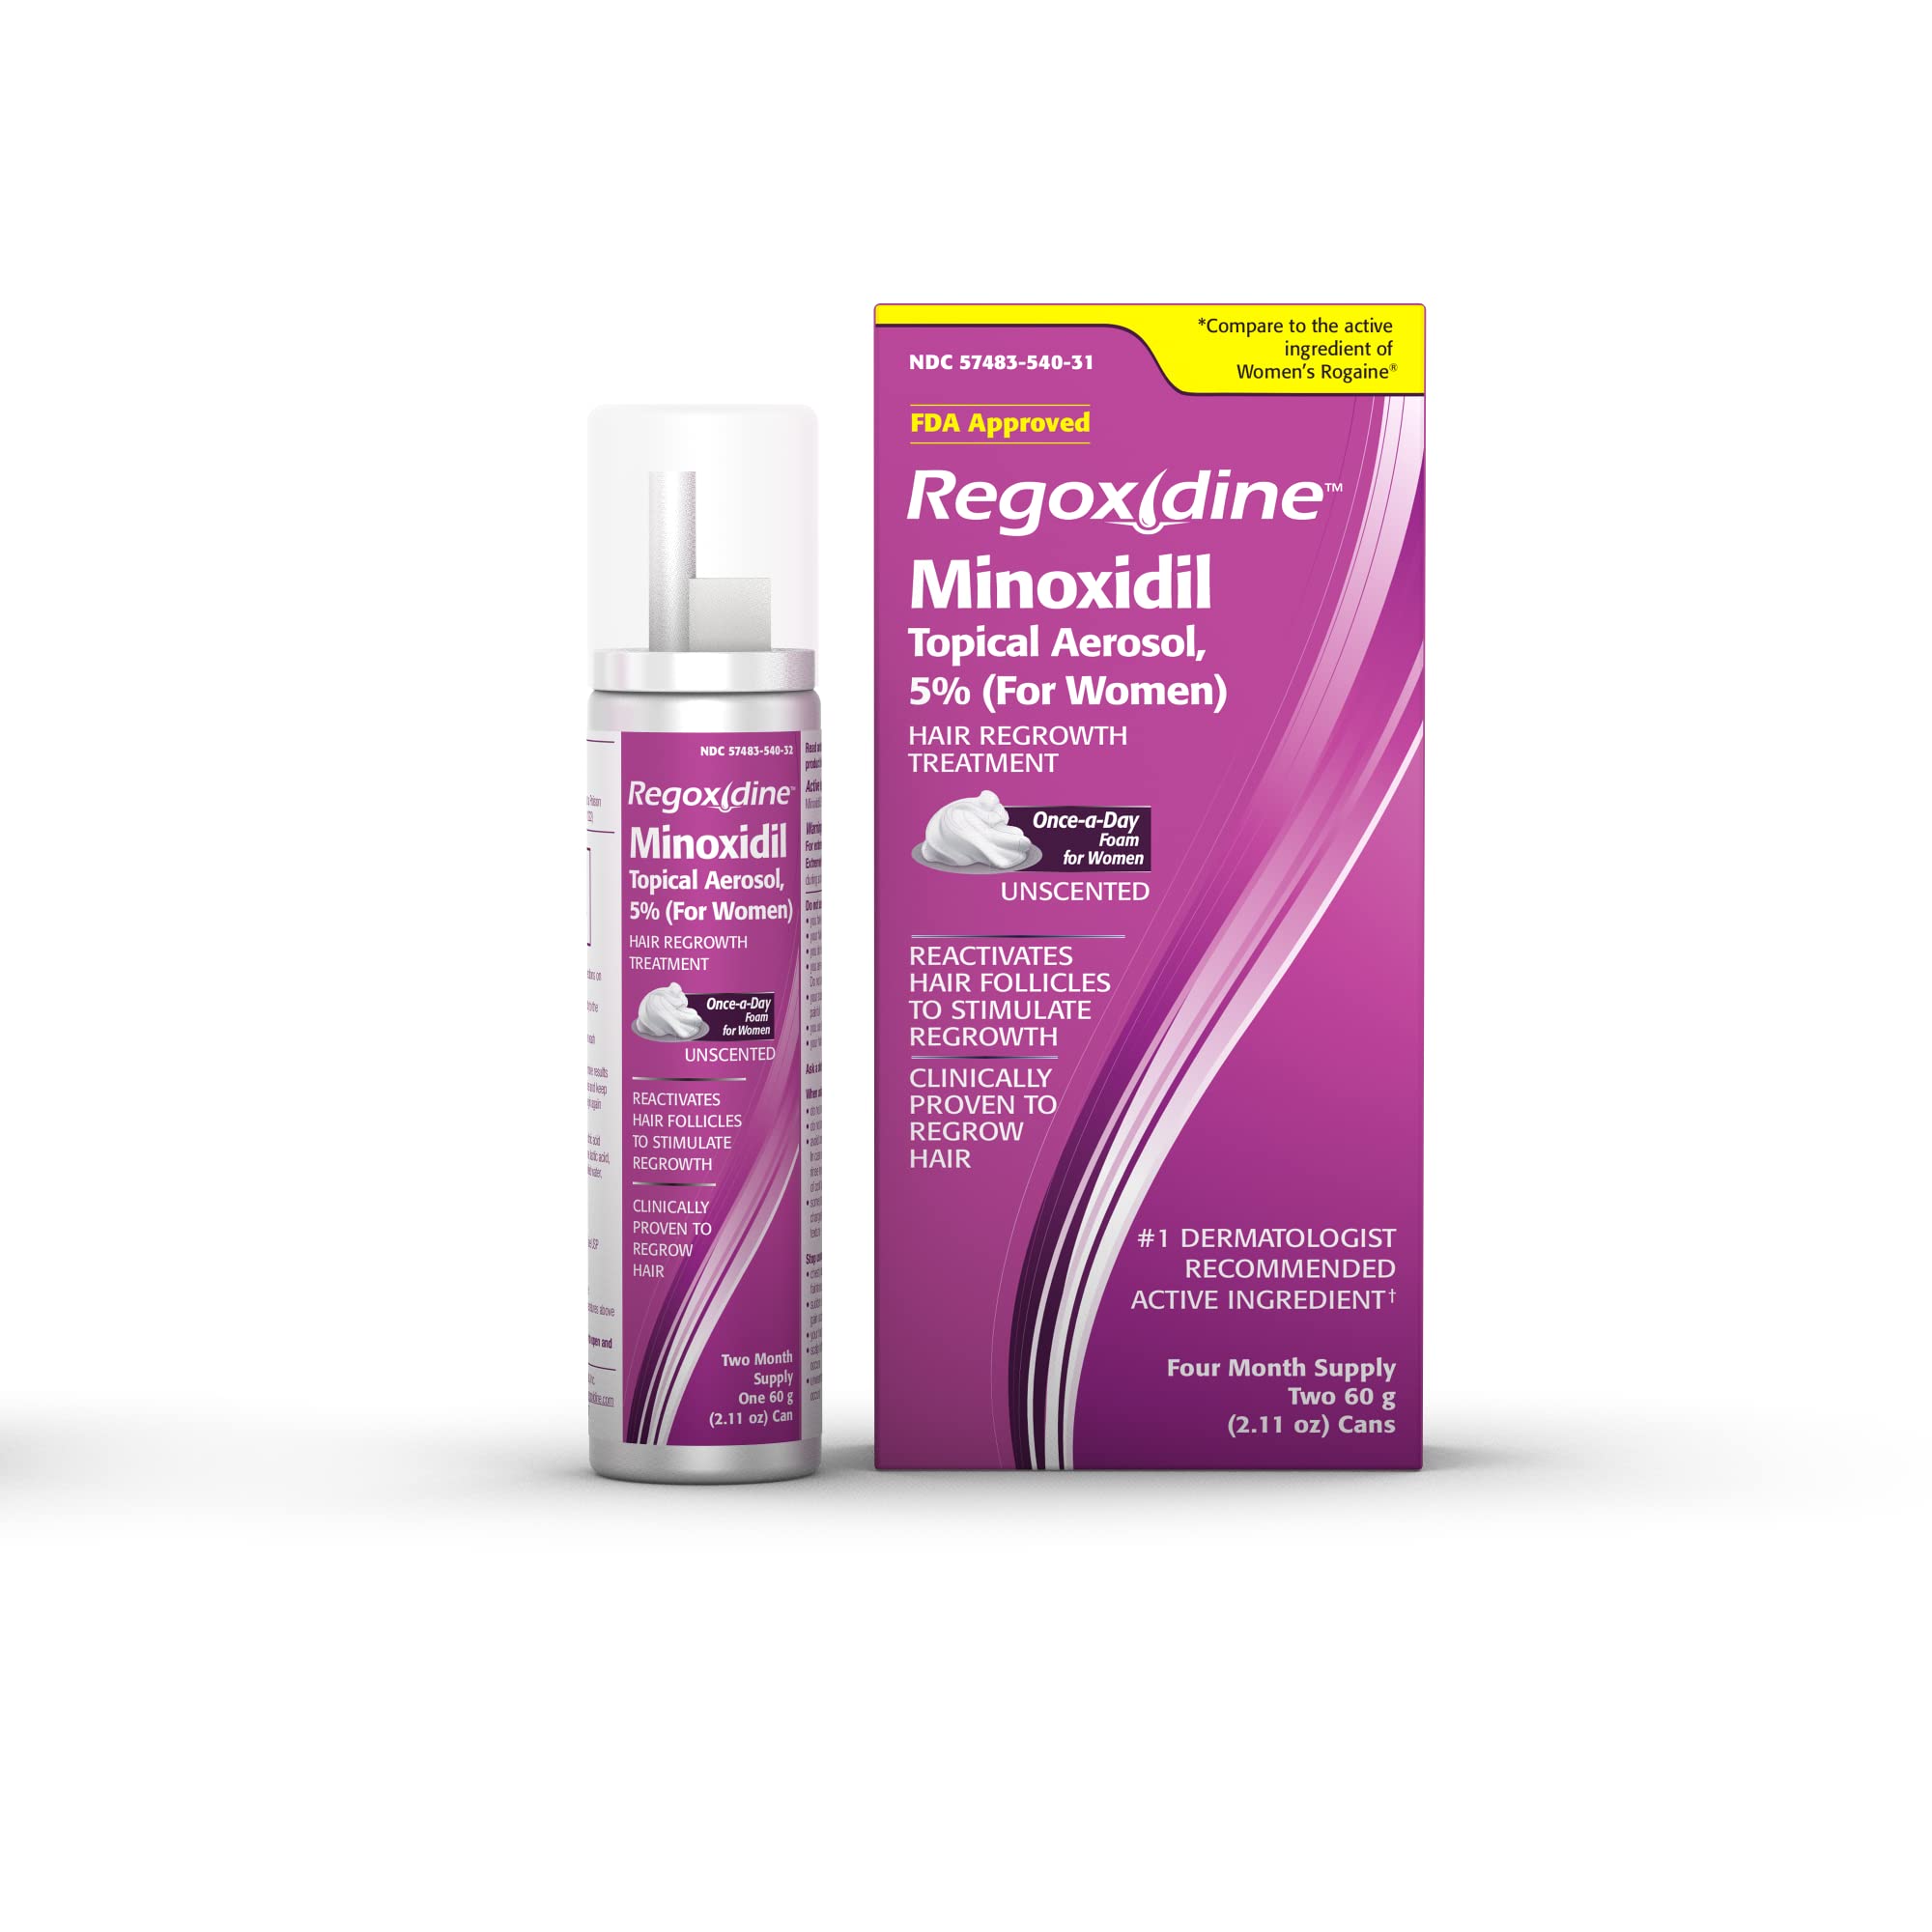 Regoxidine Women's Minoxidil Topical & Foam Helps Restore Top of Scalp Hair Loss and Support Hair Regrowth with Unscented Topical Treatment for Thinning Hair (5% Foam 4-Month Supply)